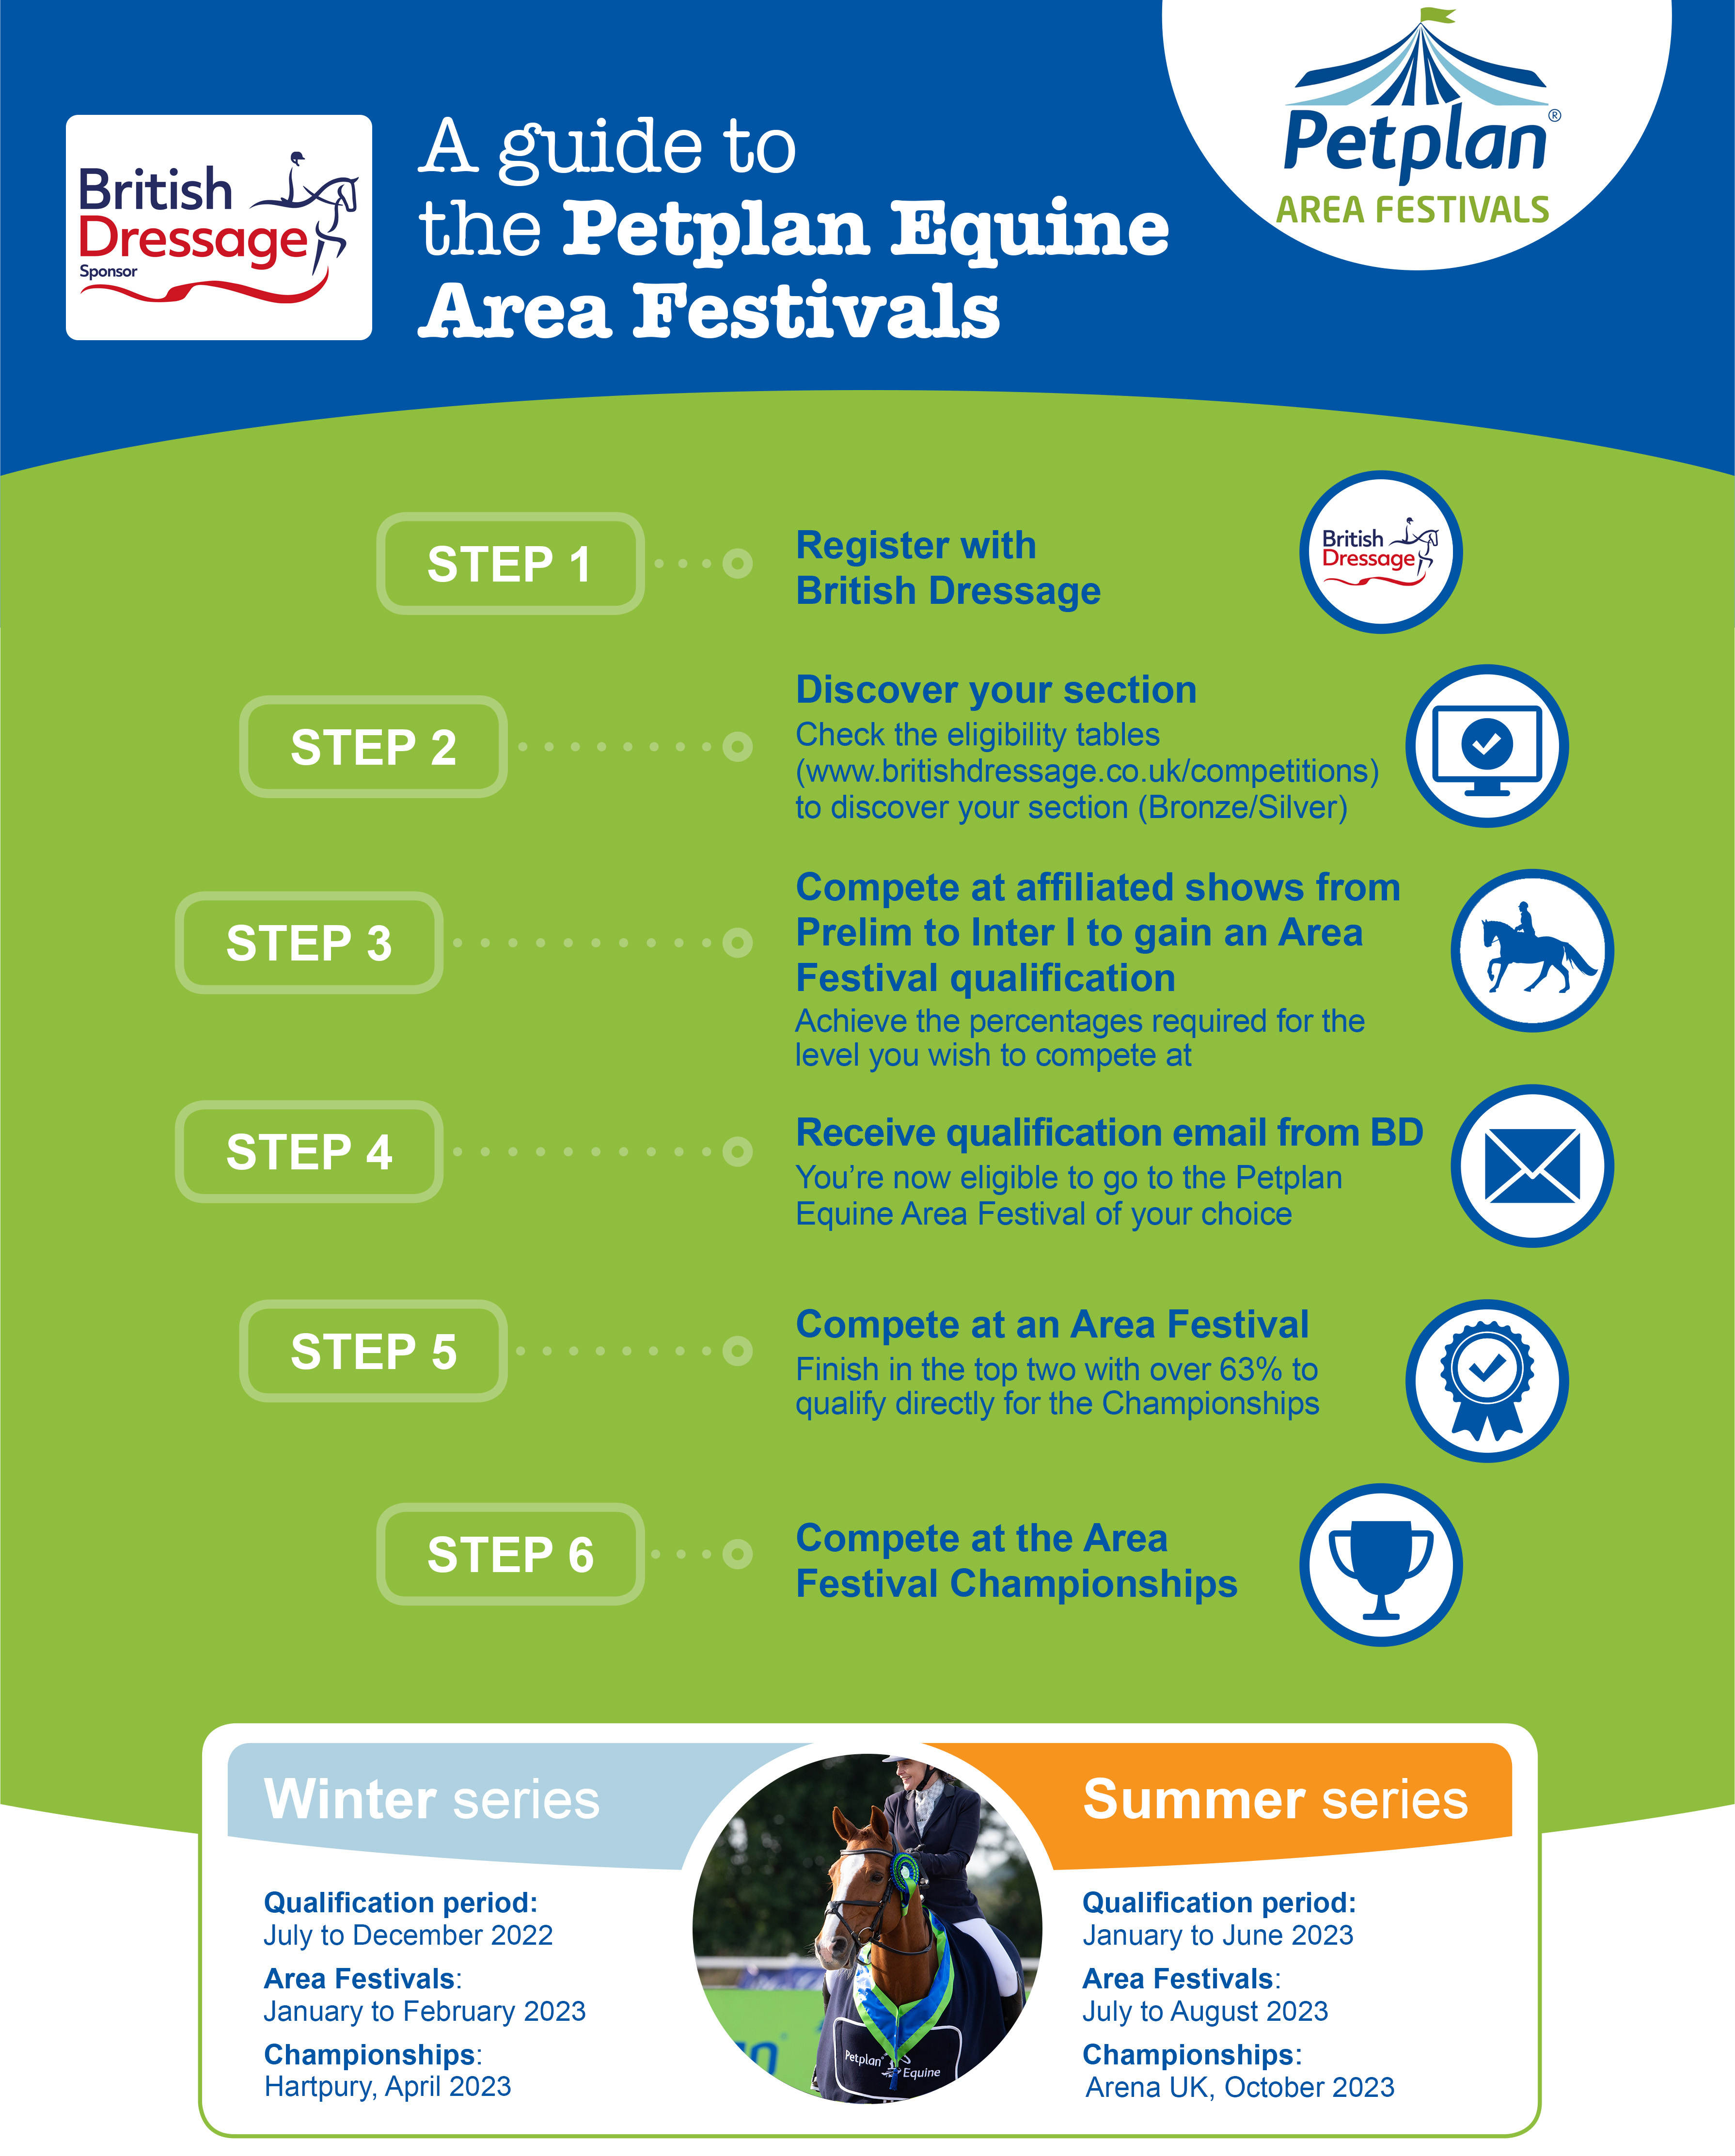 A guide to the Petplan Equine Area Festivals